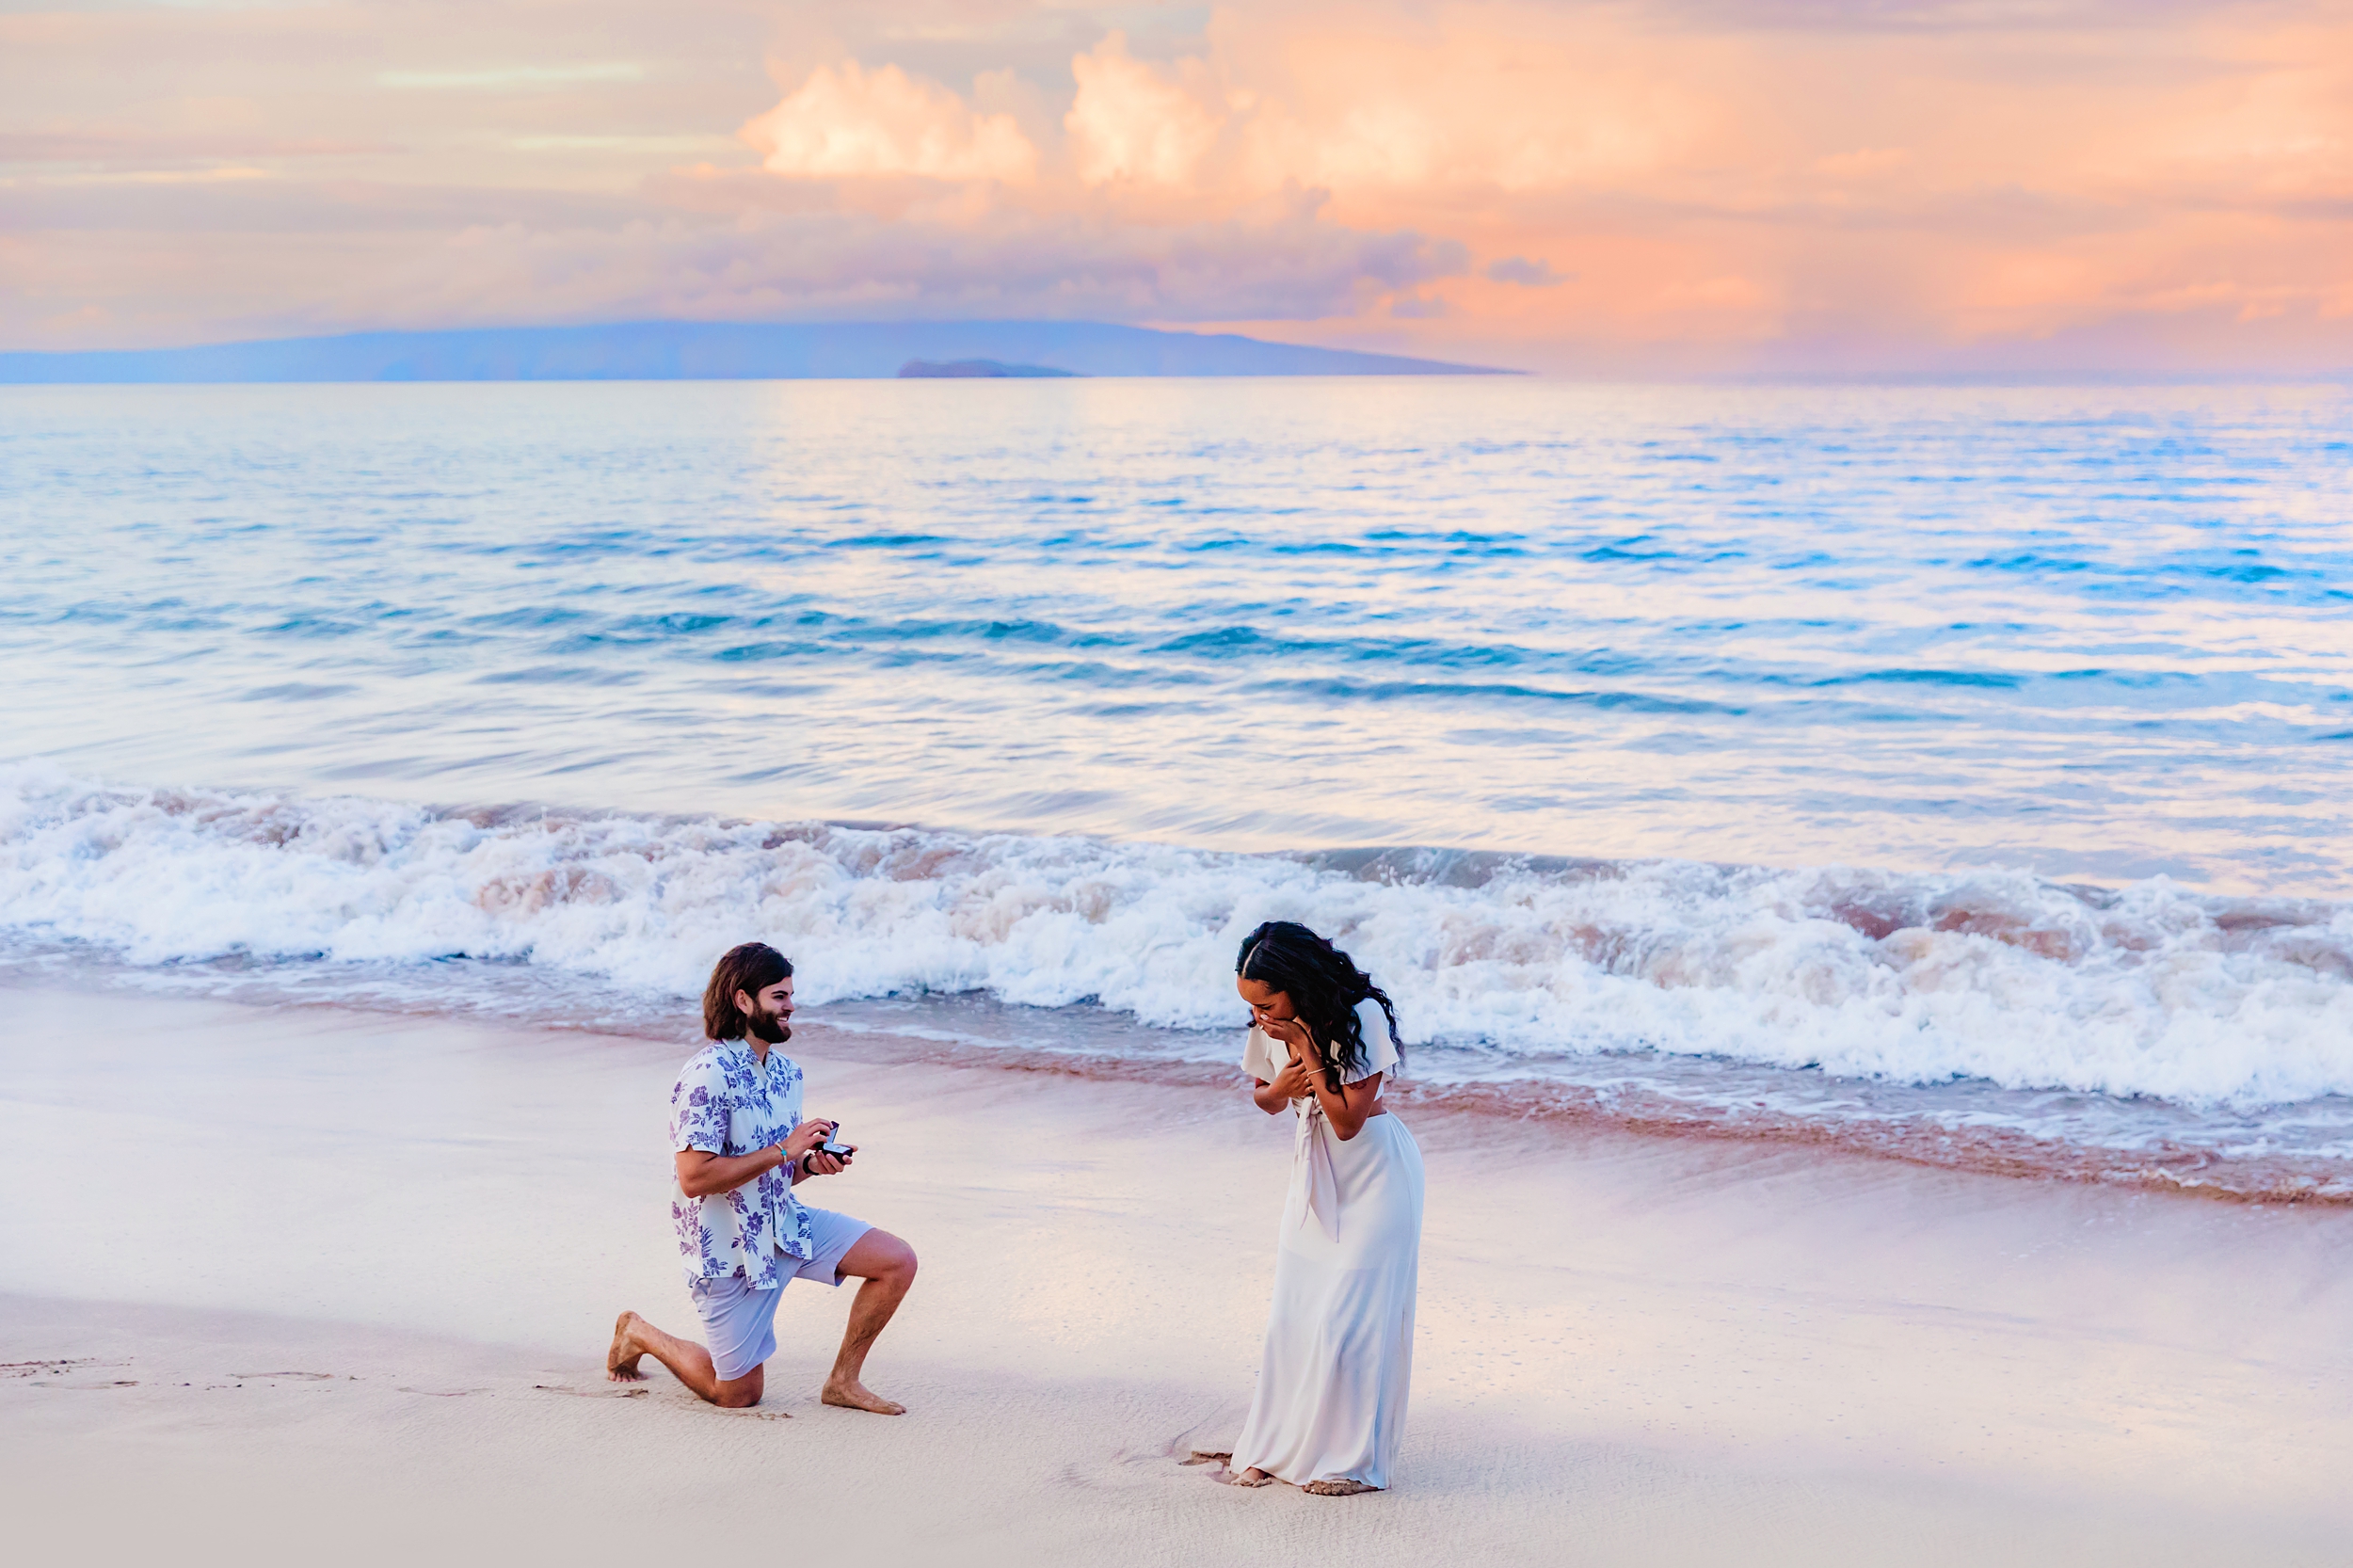 Woman in long white dress holds her mouth and gasps in surprise as her boyfriend proposes to her on the beach in Maui. Photographed at sunrise in Wailea.